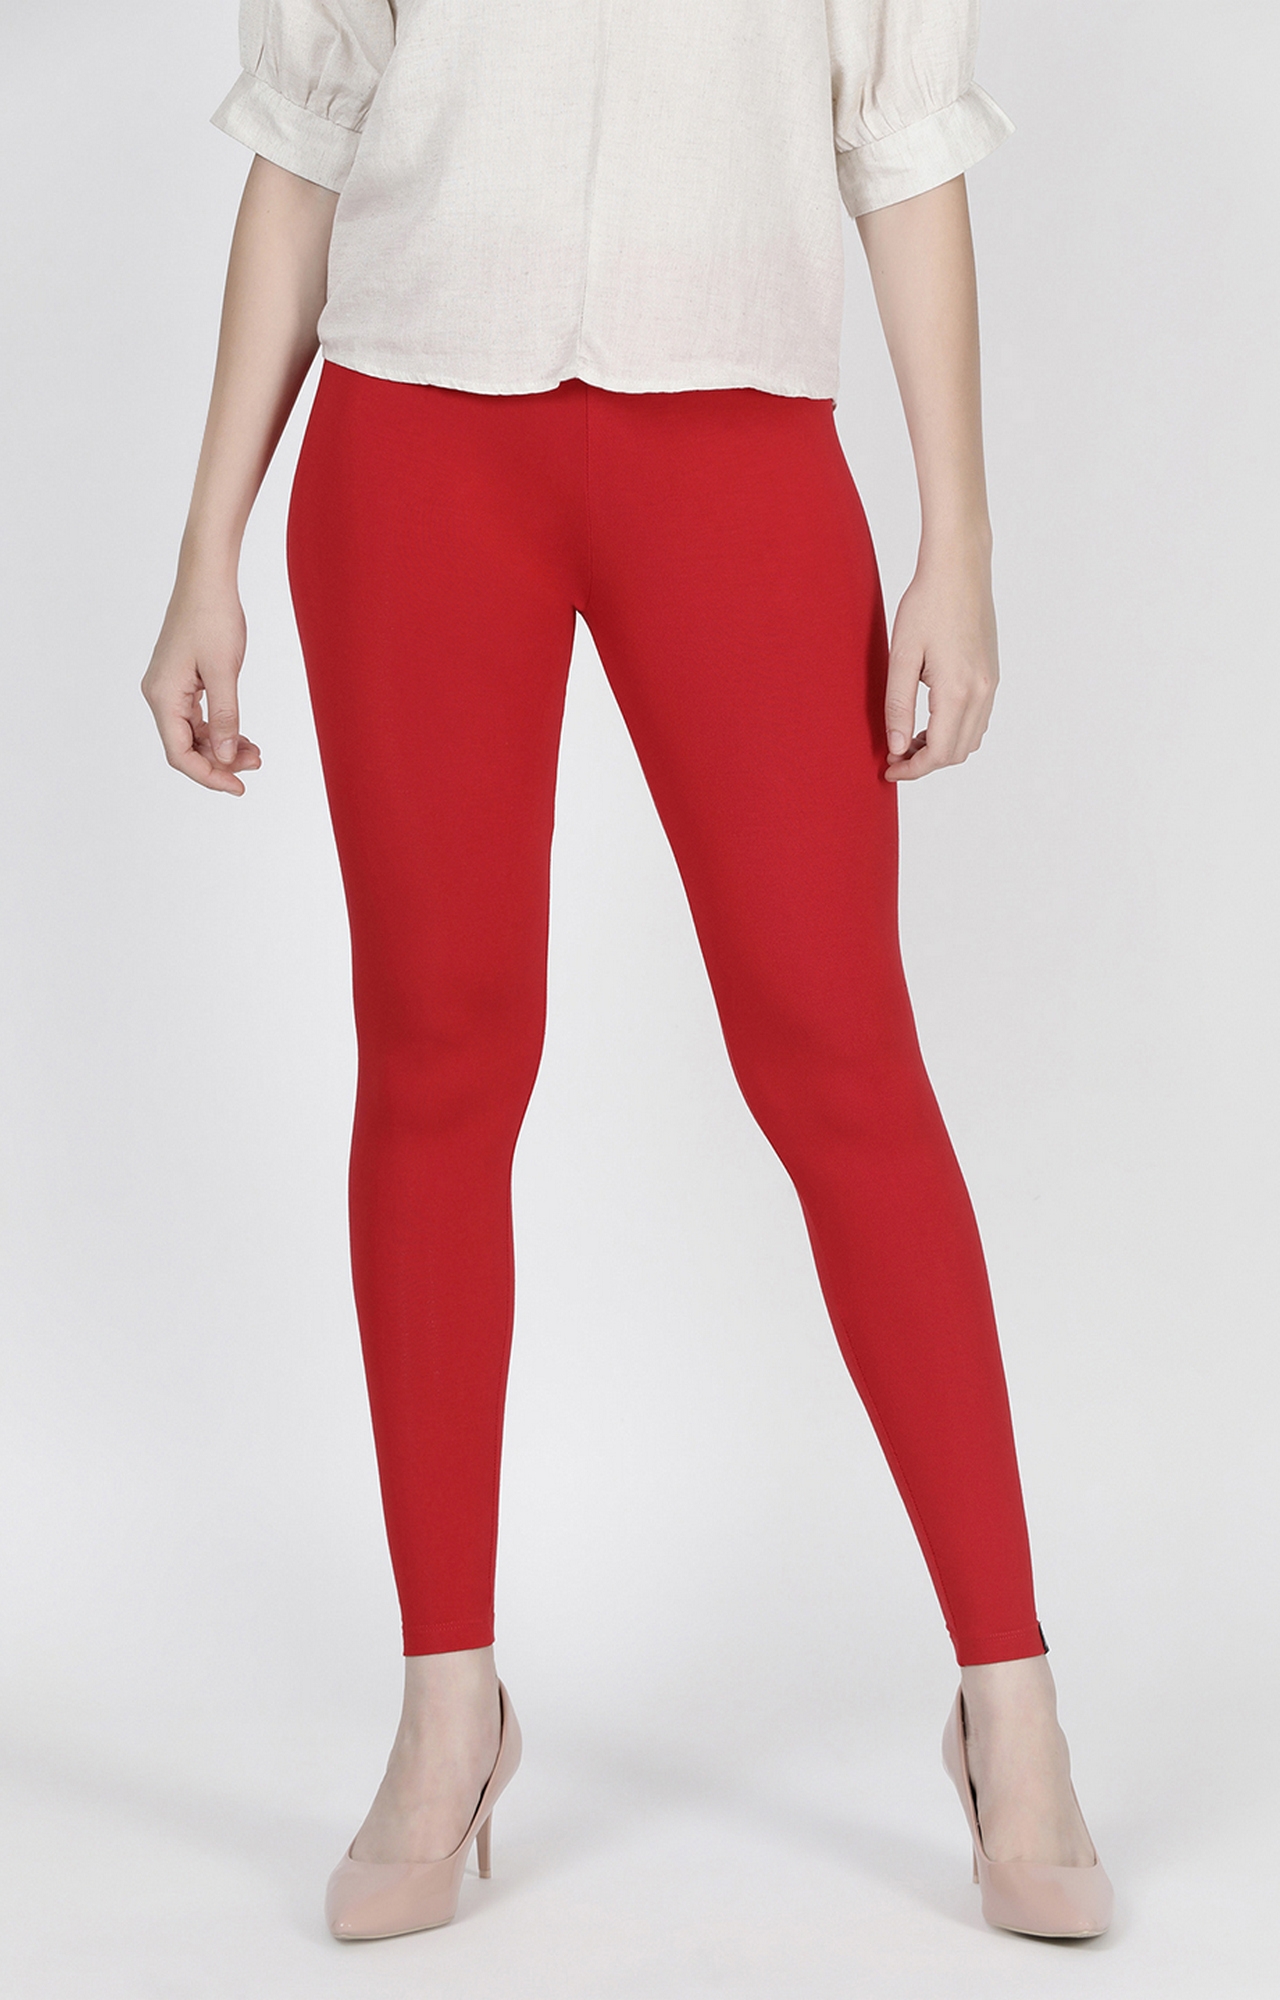 Twinbirds Tomato Red Solid Ankle Legging